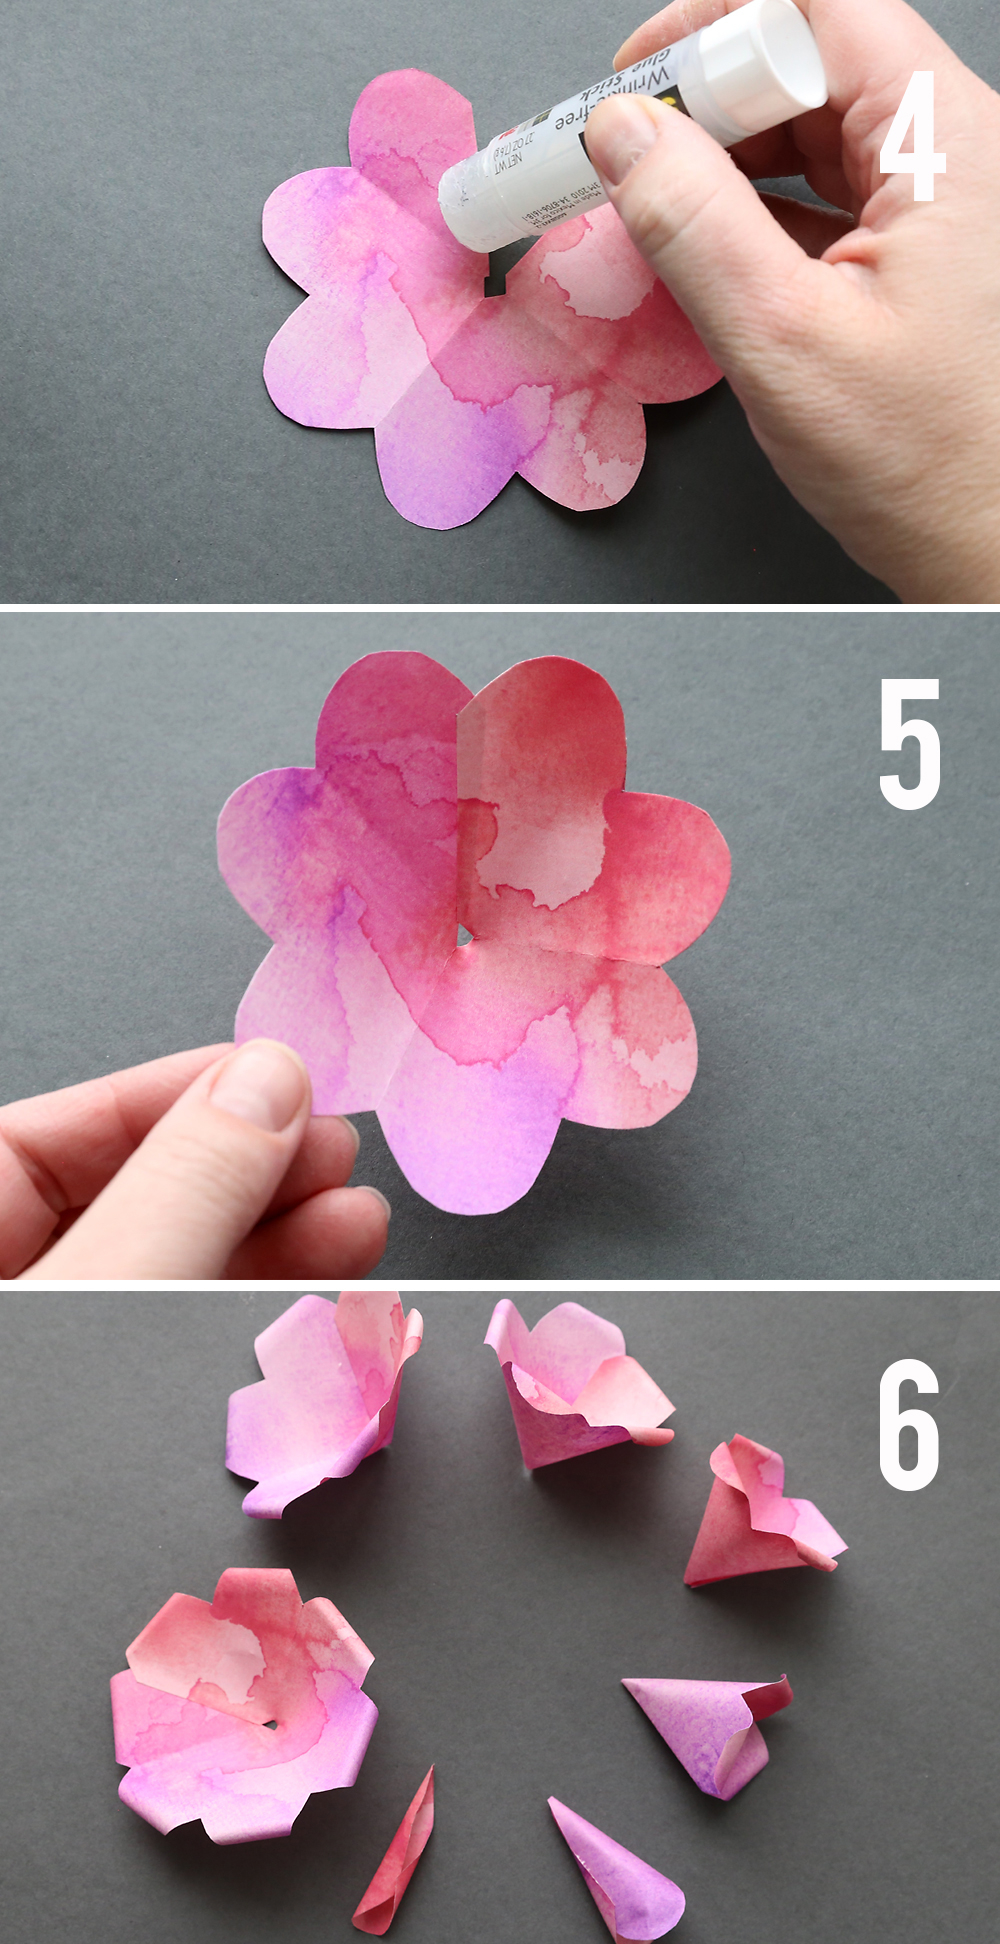 How To Make An Origami Flower Easy Make Gorgeous Paper Roses With This Free Paper Rose Template Its